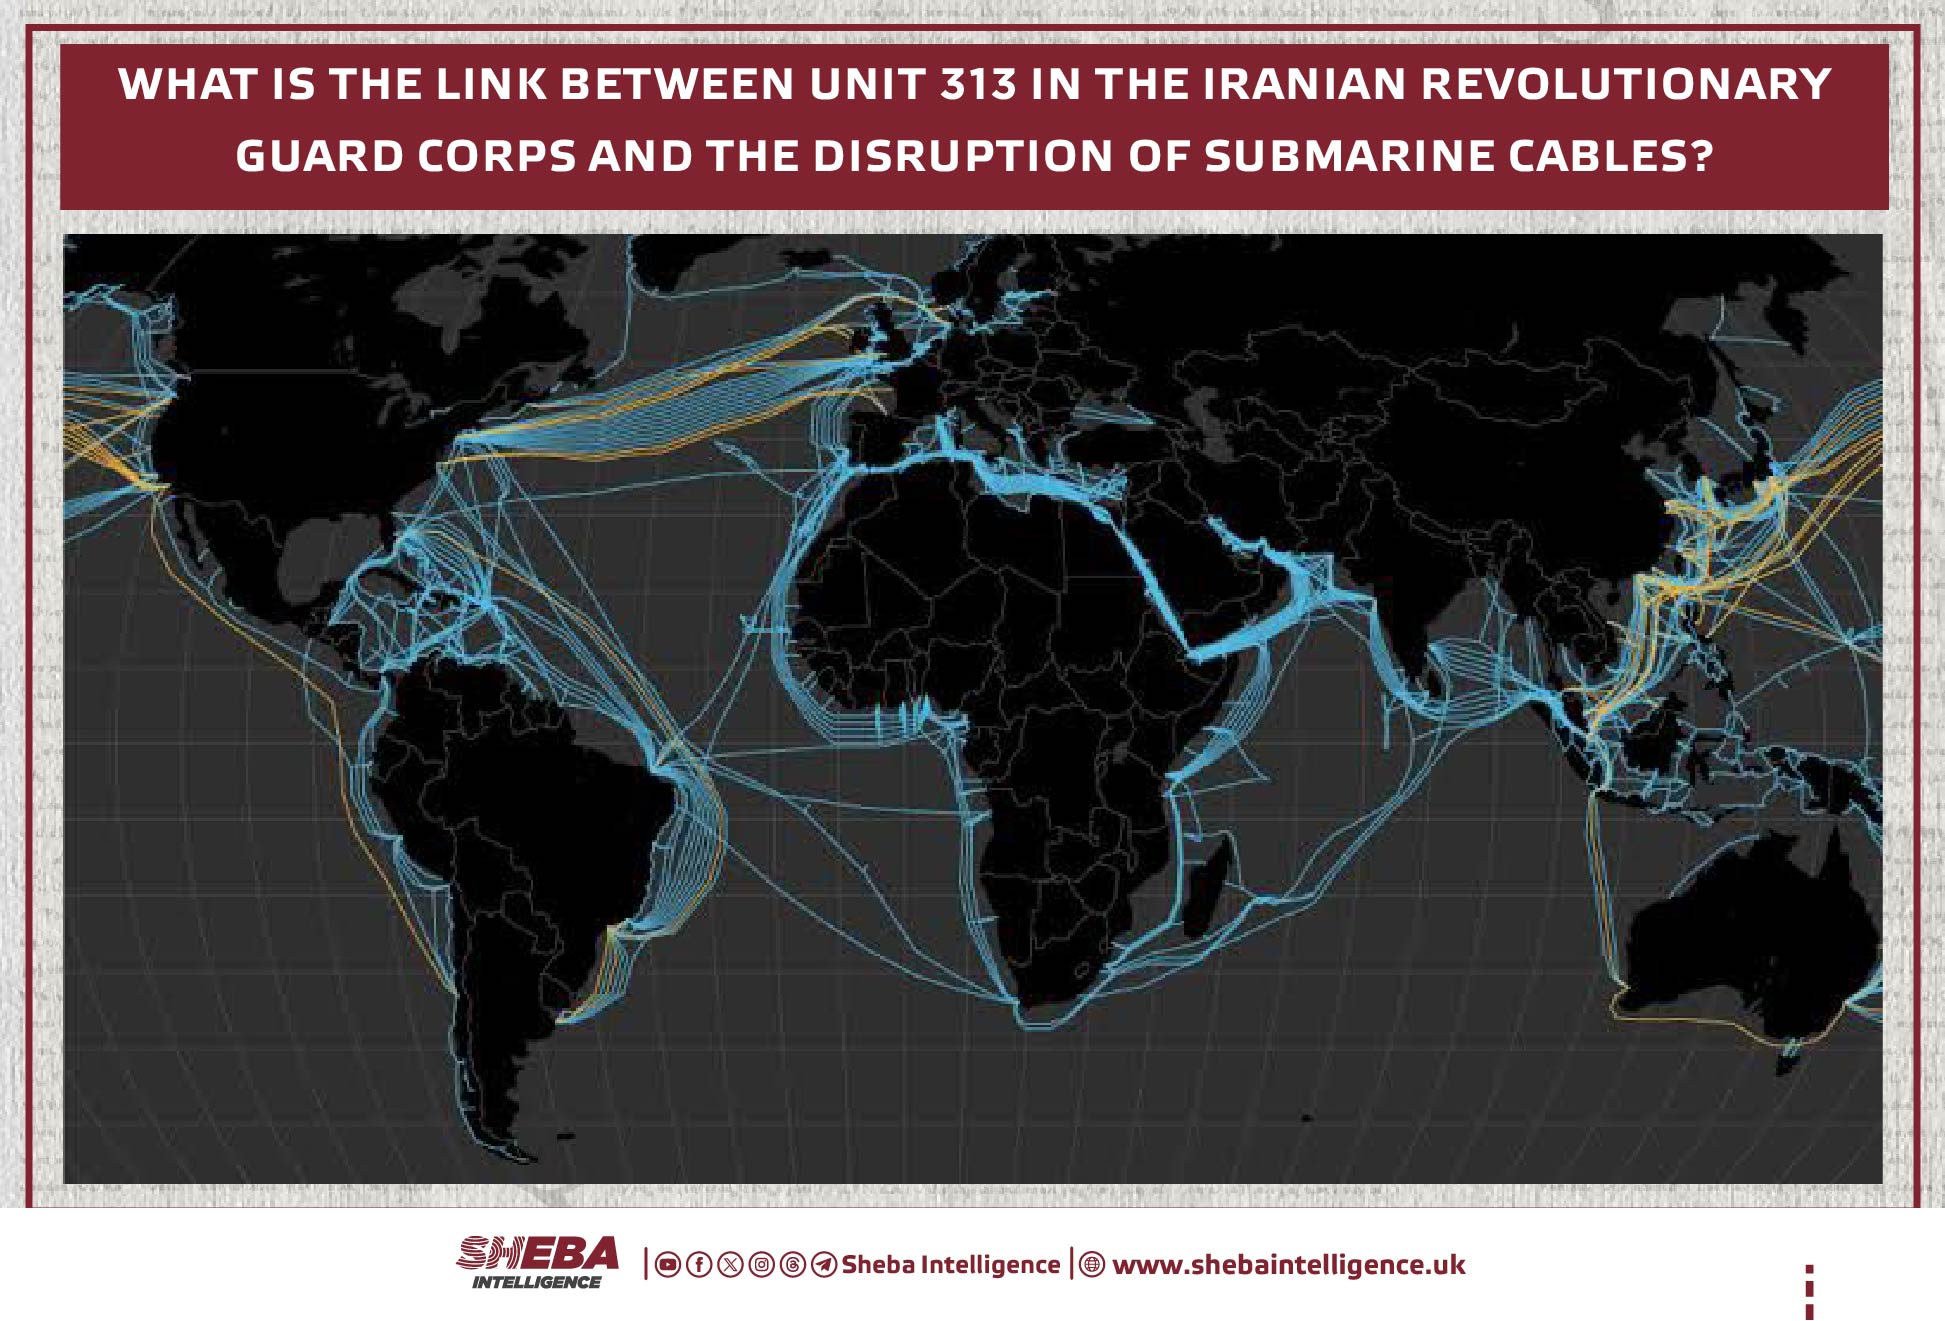 What Is the Link Between Unit 313 in the Iranian Revolutionary Guard Corps and the Disruption of Submarine Cables?